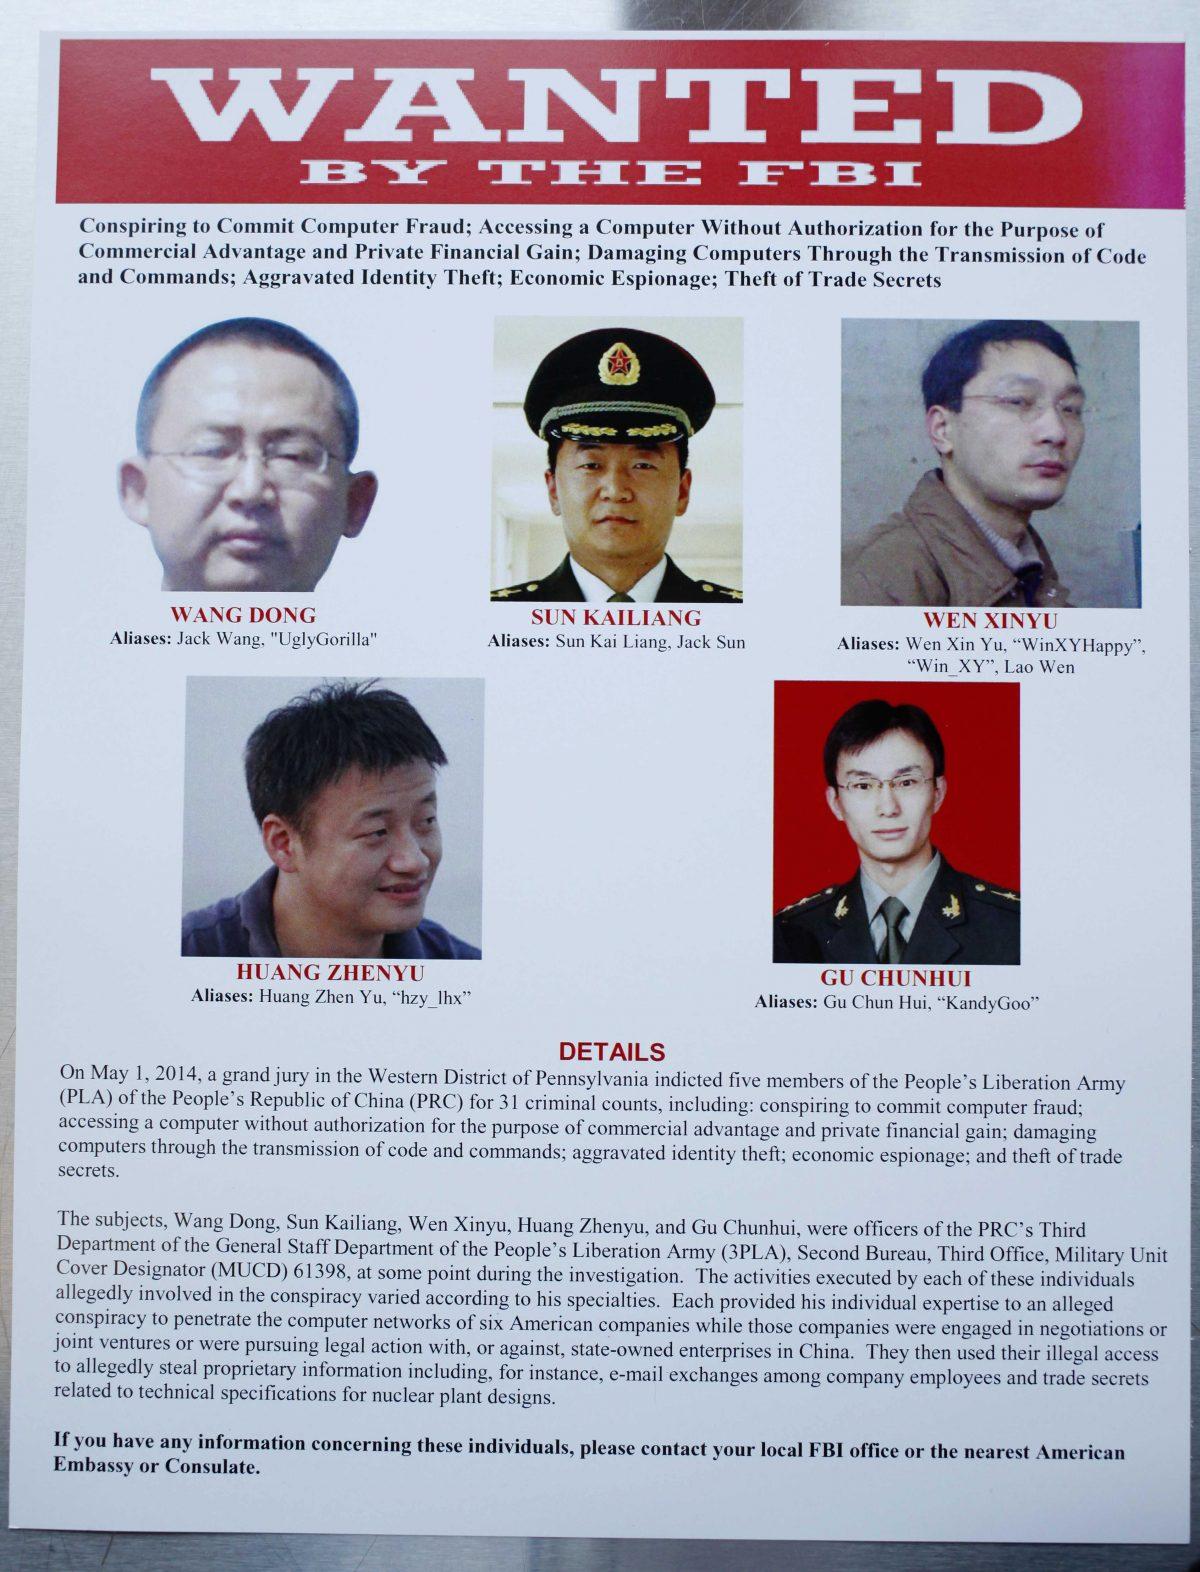 This wanted poster—five Chinese military officials charged with economic espionage and trade secret theft—is displayed at the Justice Department in Washington on May 19, 2014. (AP Photo)